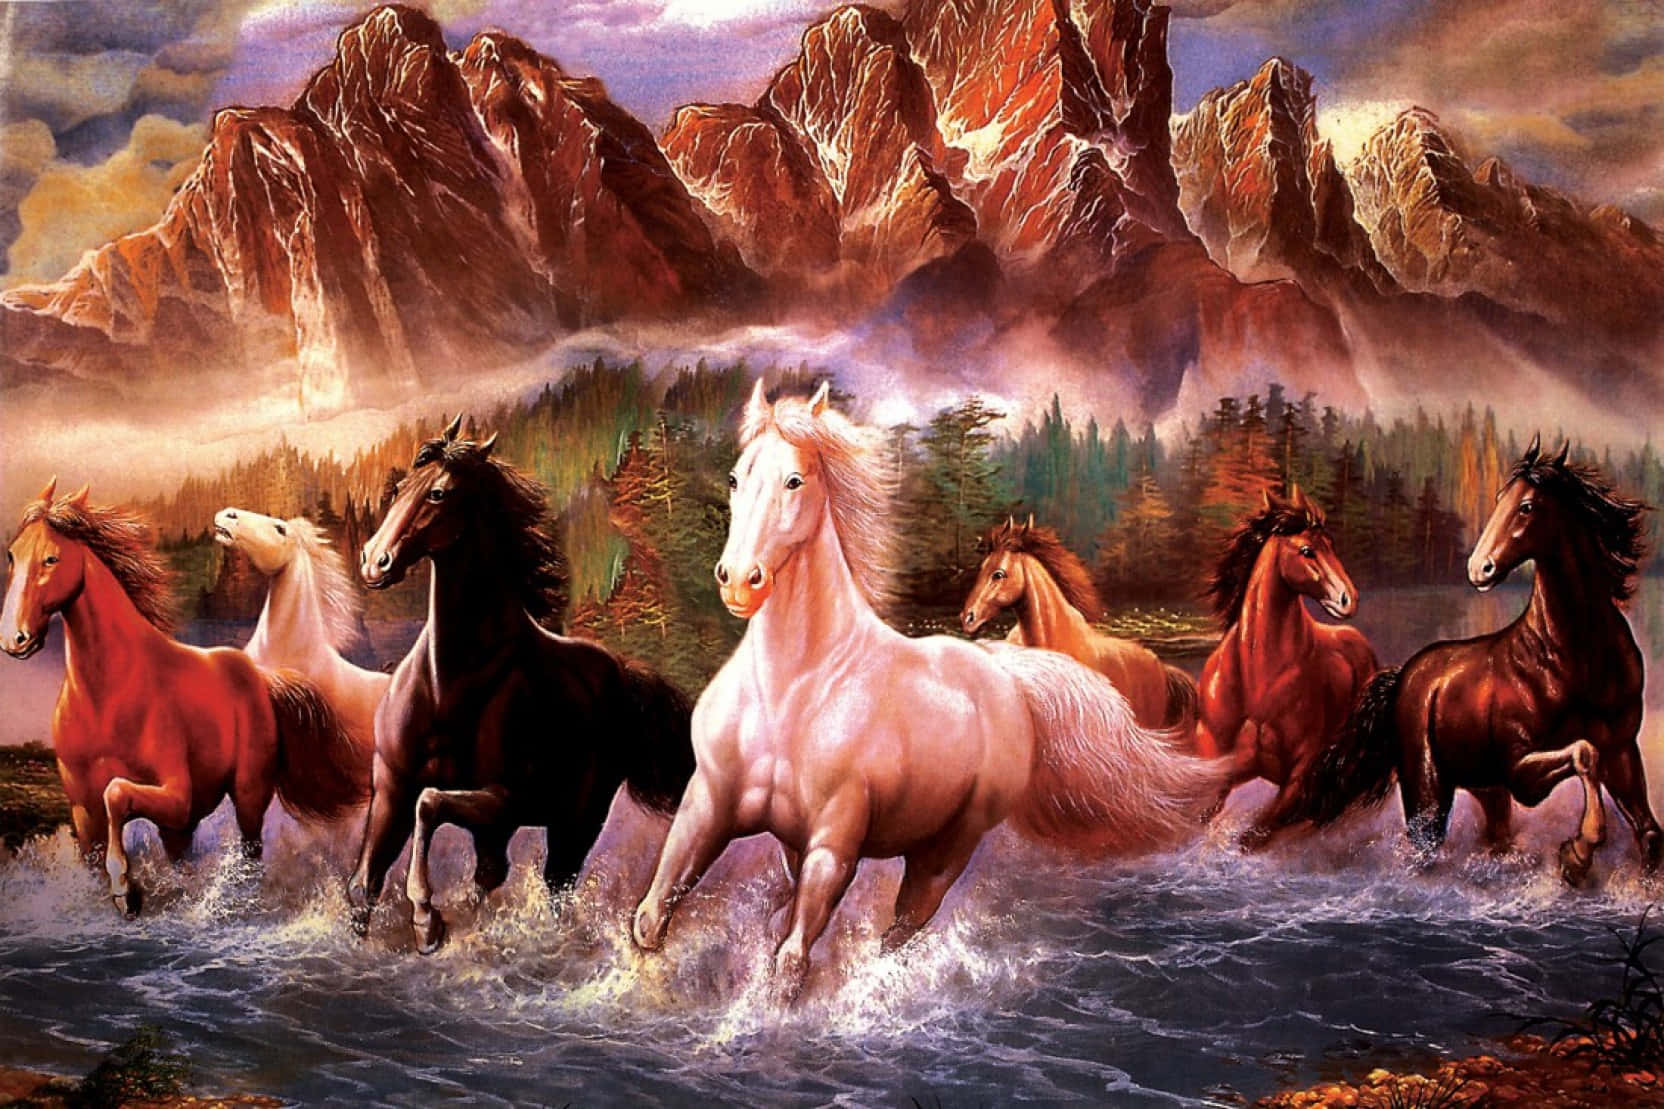 7 Horses With Mountain And Pine Trees Wallpaper